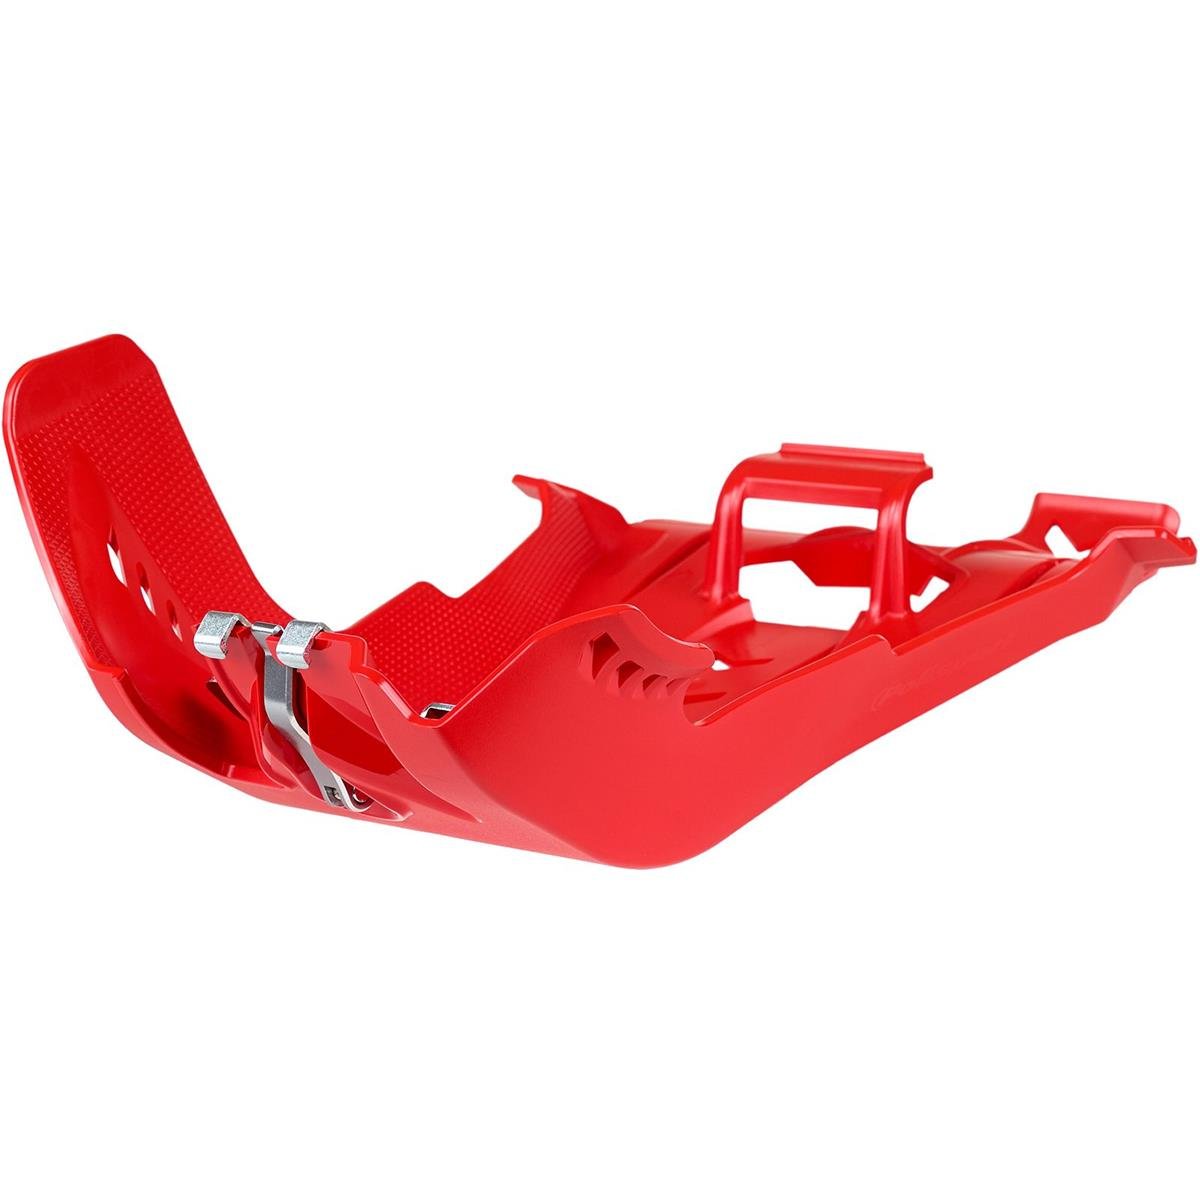 Polisport Skid plate with deflection protection Fortress Beta RR 250/300 20-, Red